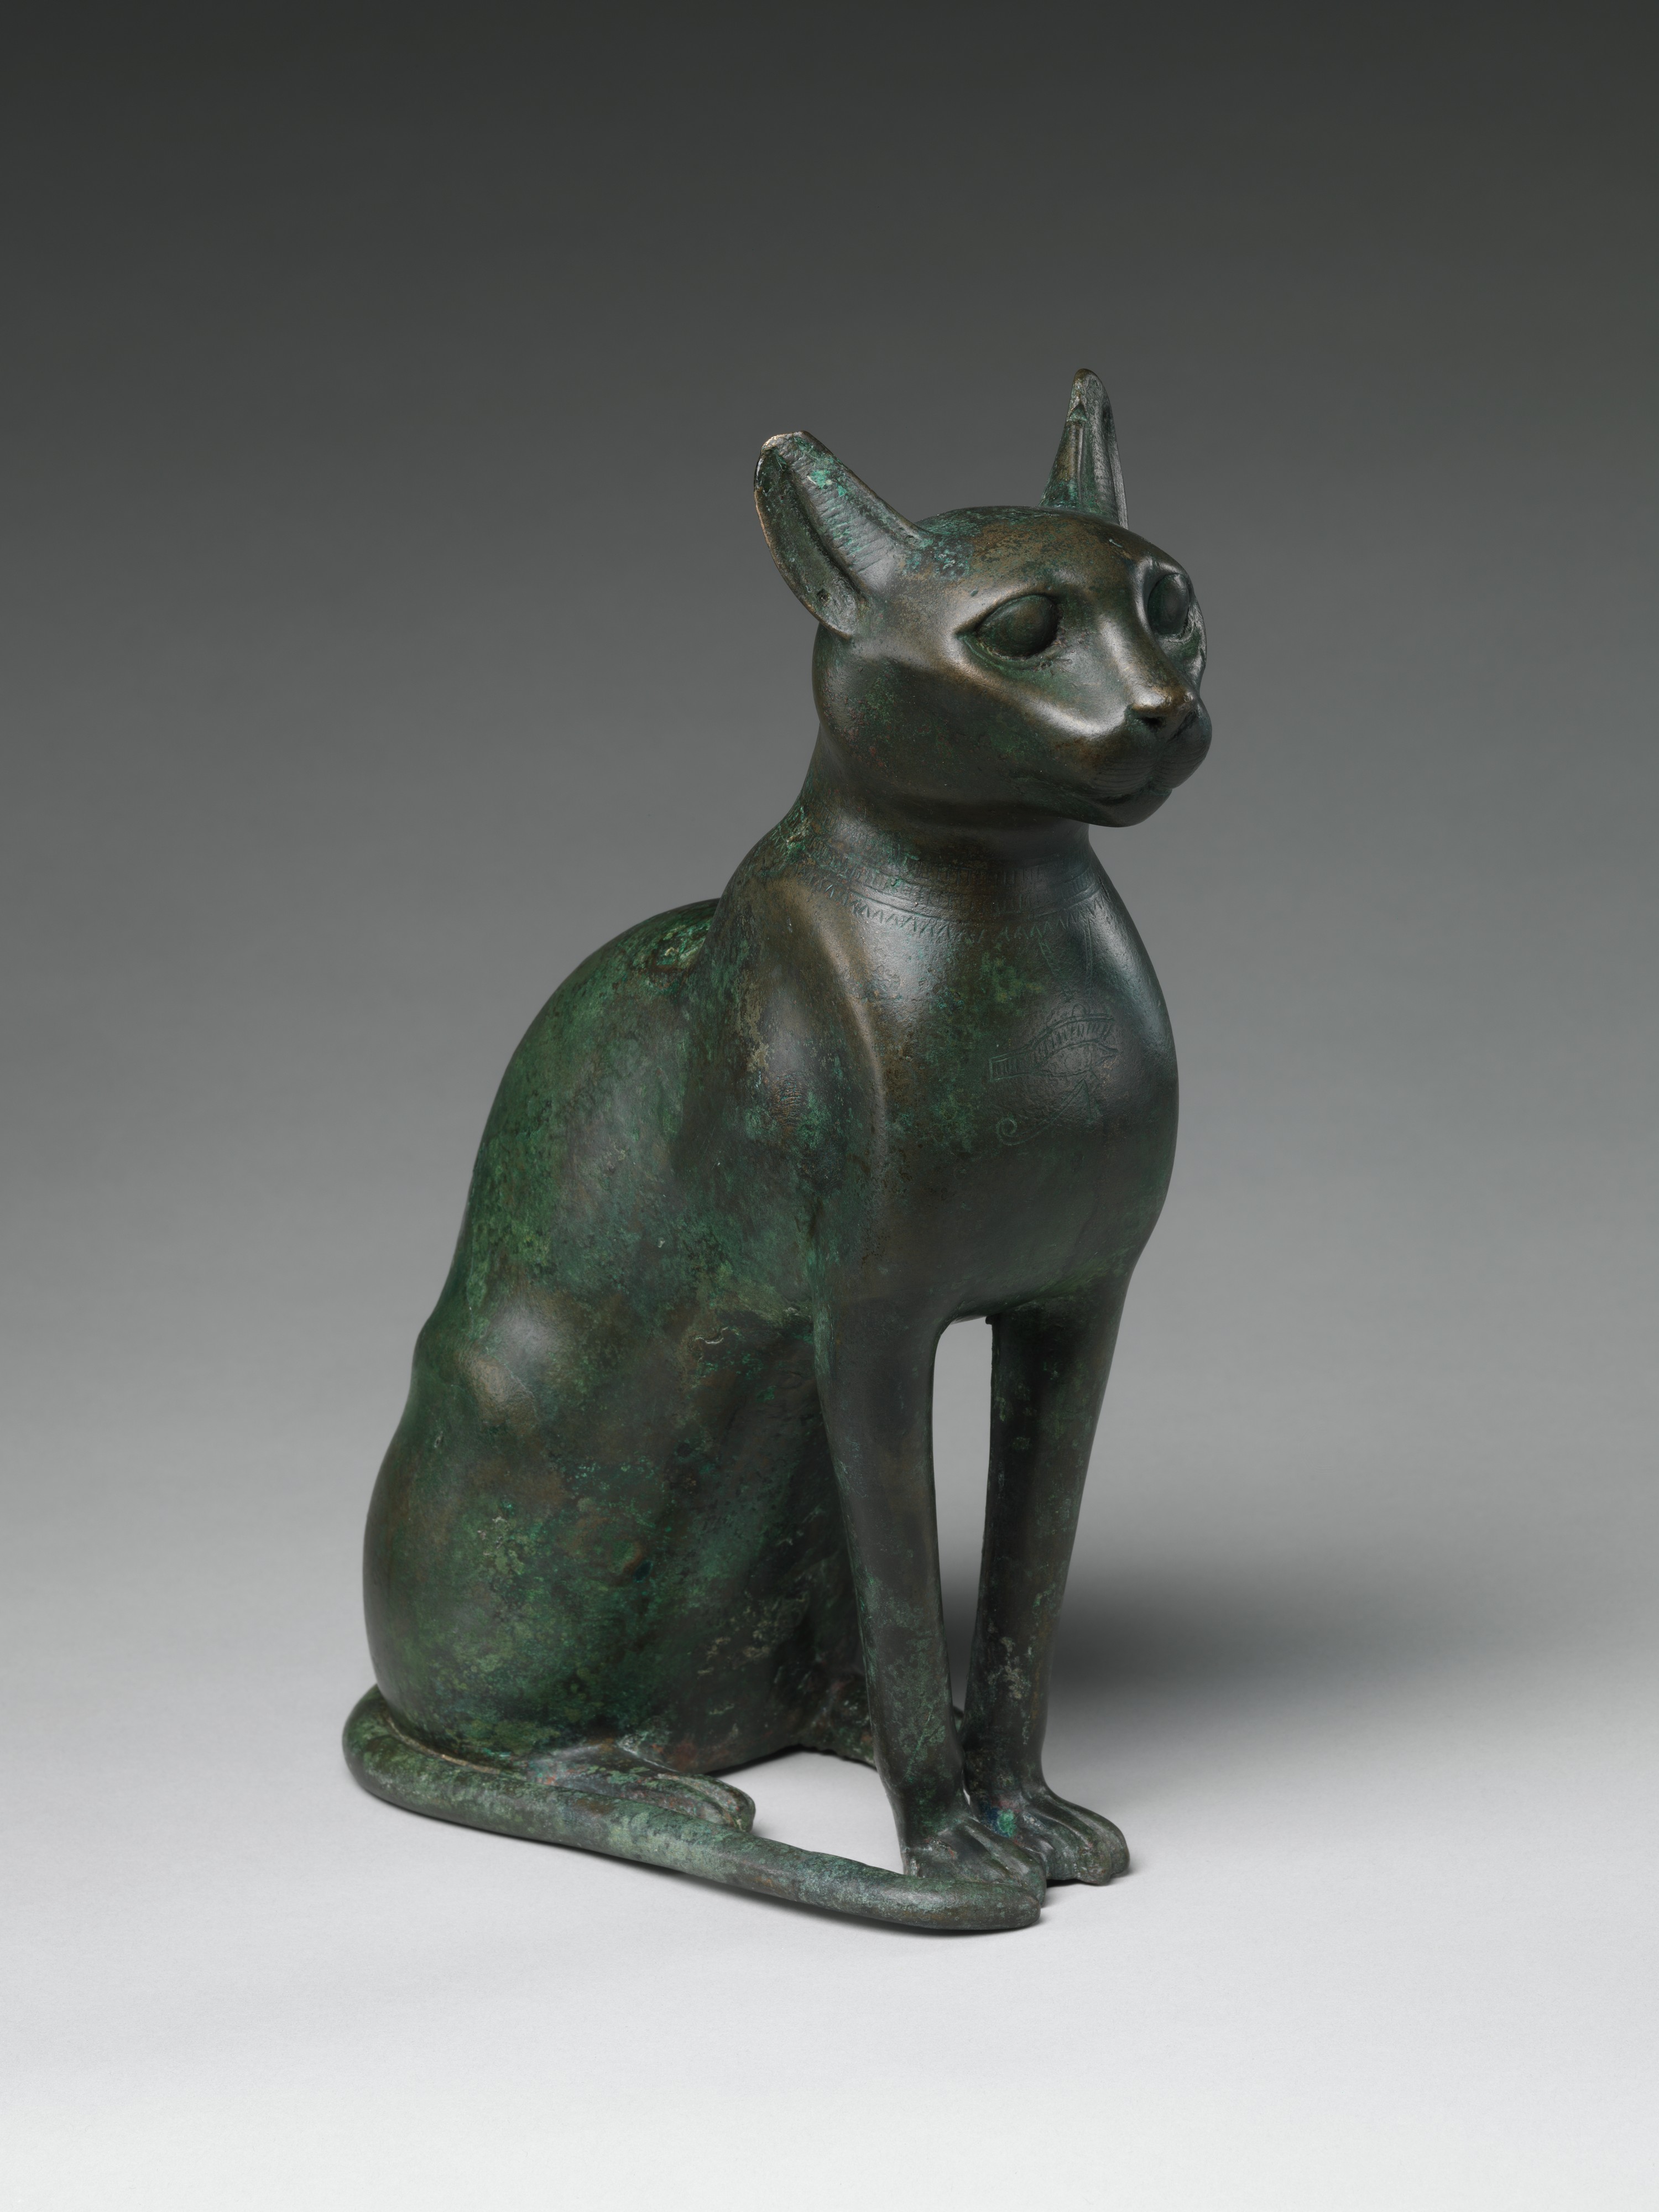 Cat Statuette intended to contain a mummified cat, Ptolemaic Period